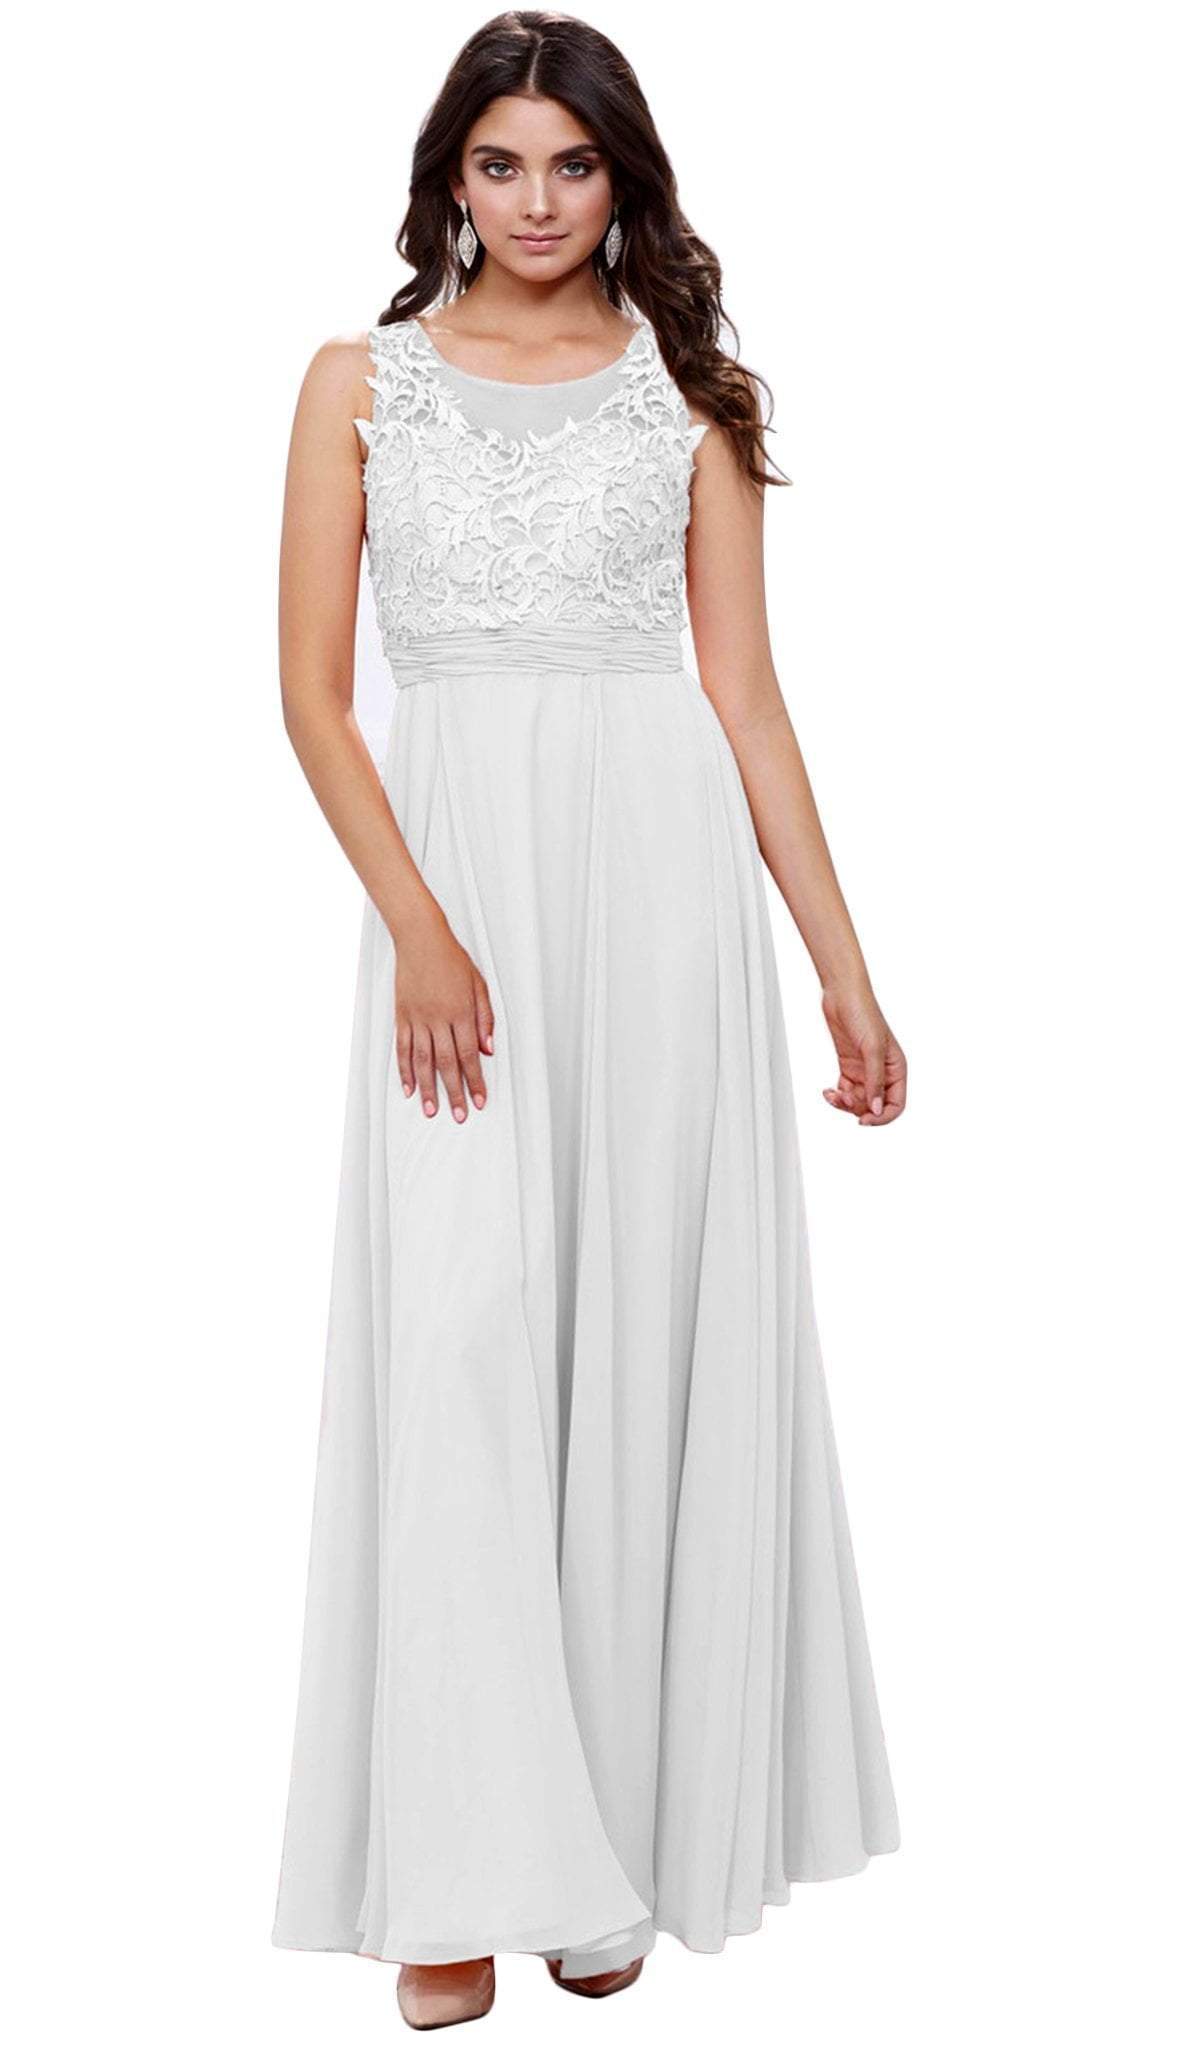 Nox Anabel - 8334 Illusion Applique Ornate Gown Special Occasion Dress XS / White